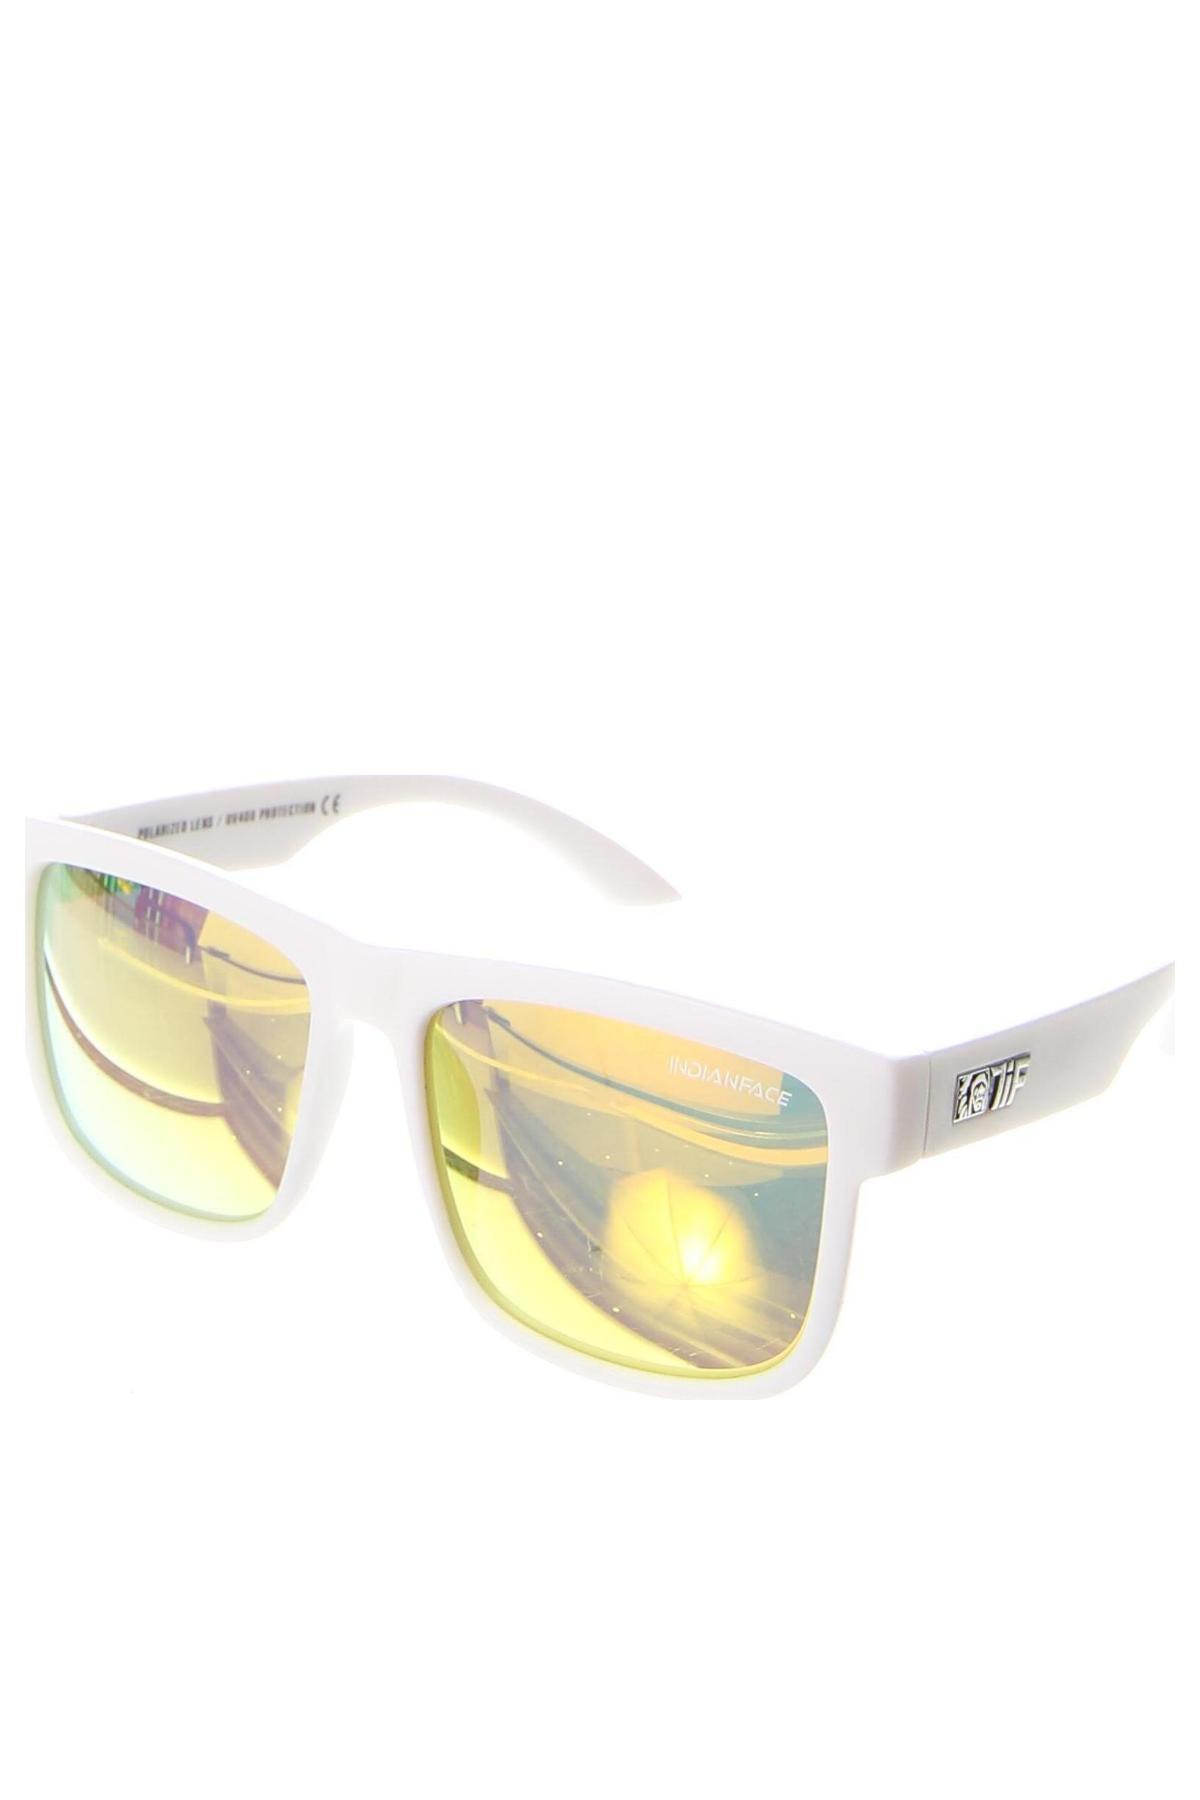 Sonnenbrille The Indian Face, Farbe Weiß, Preis 96,91 €